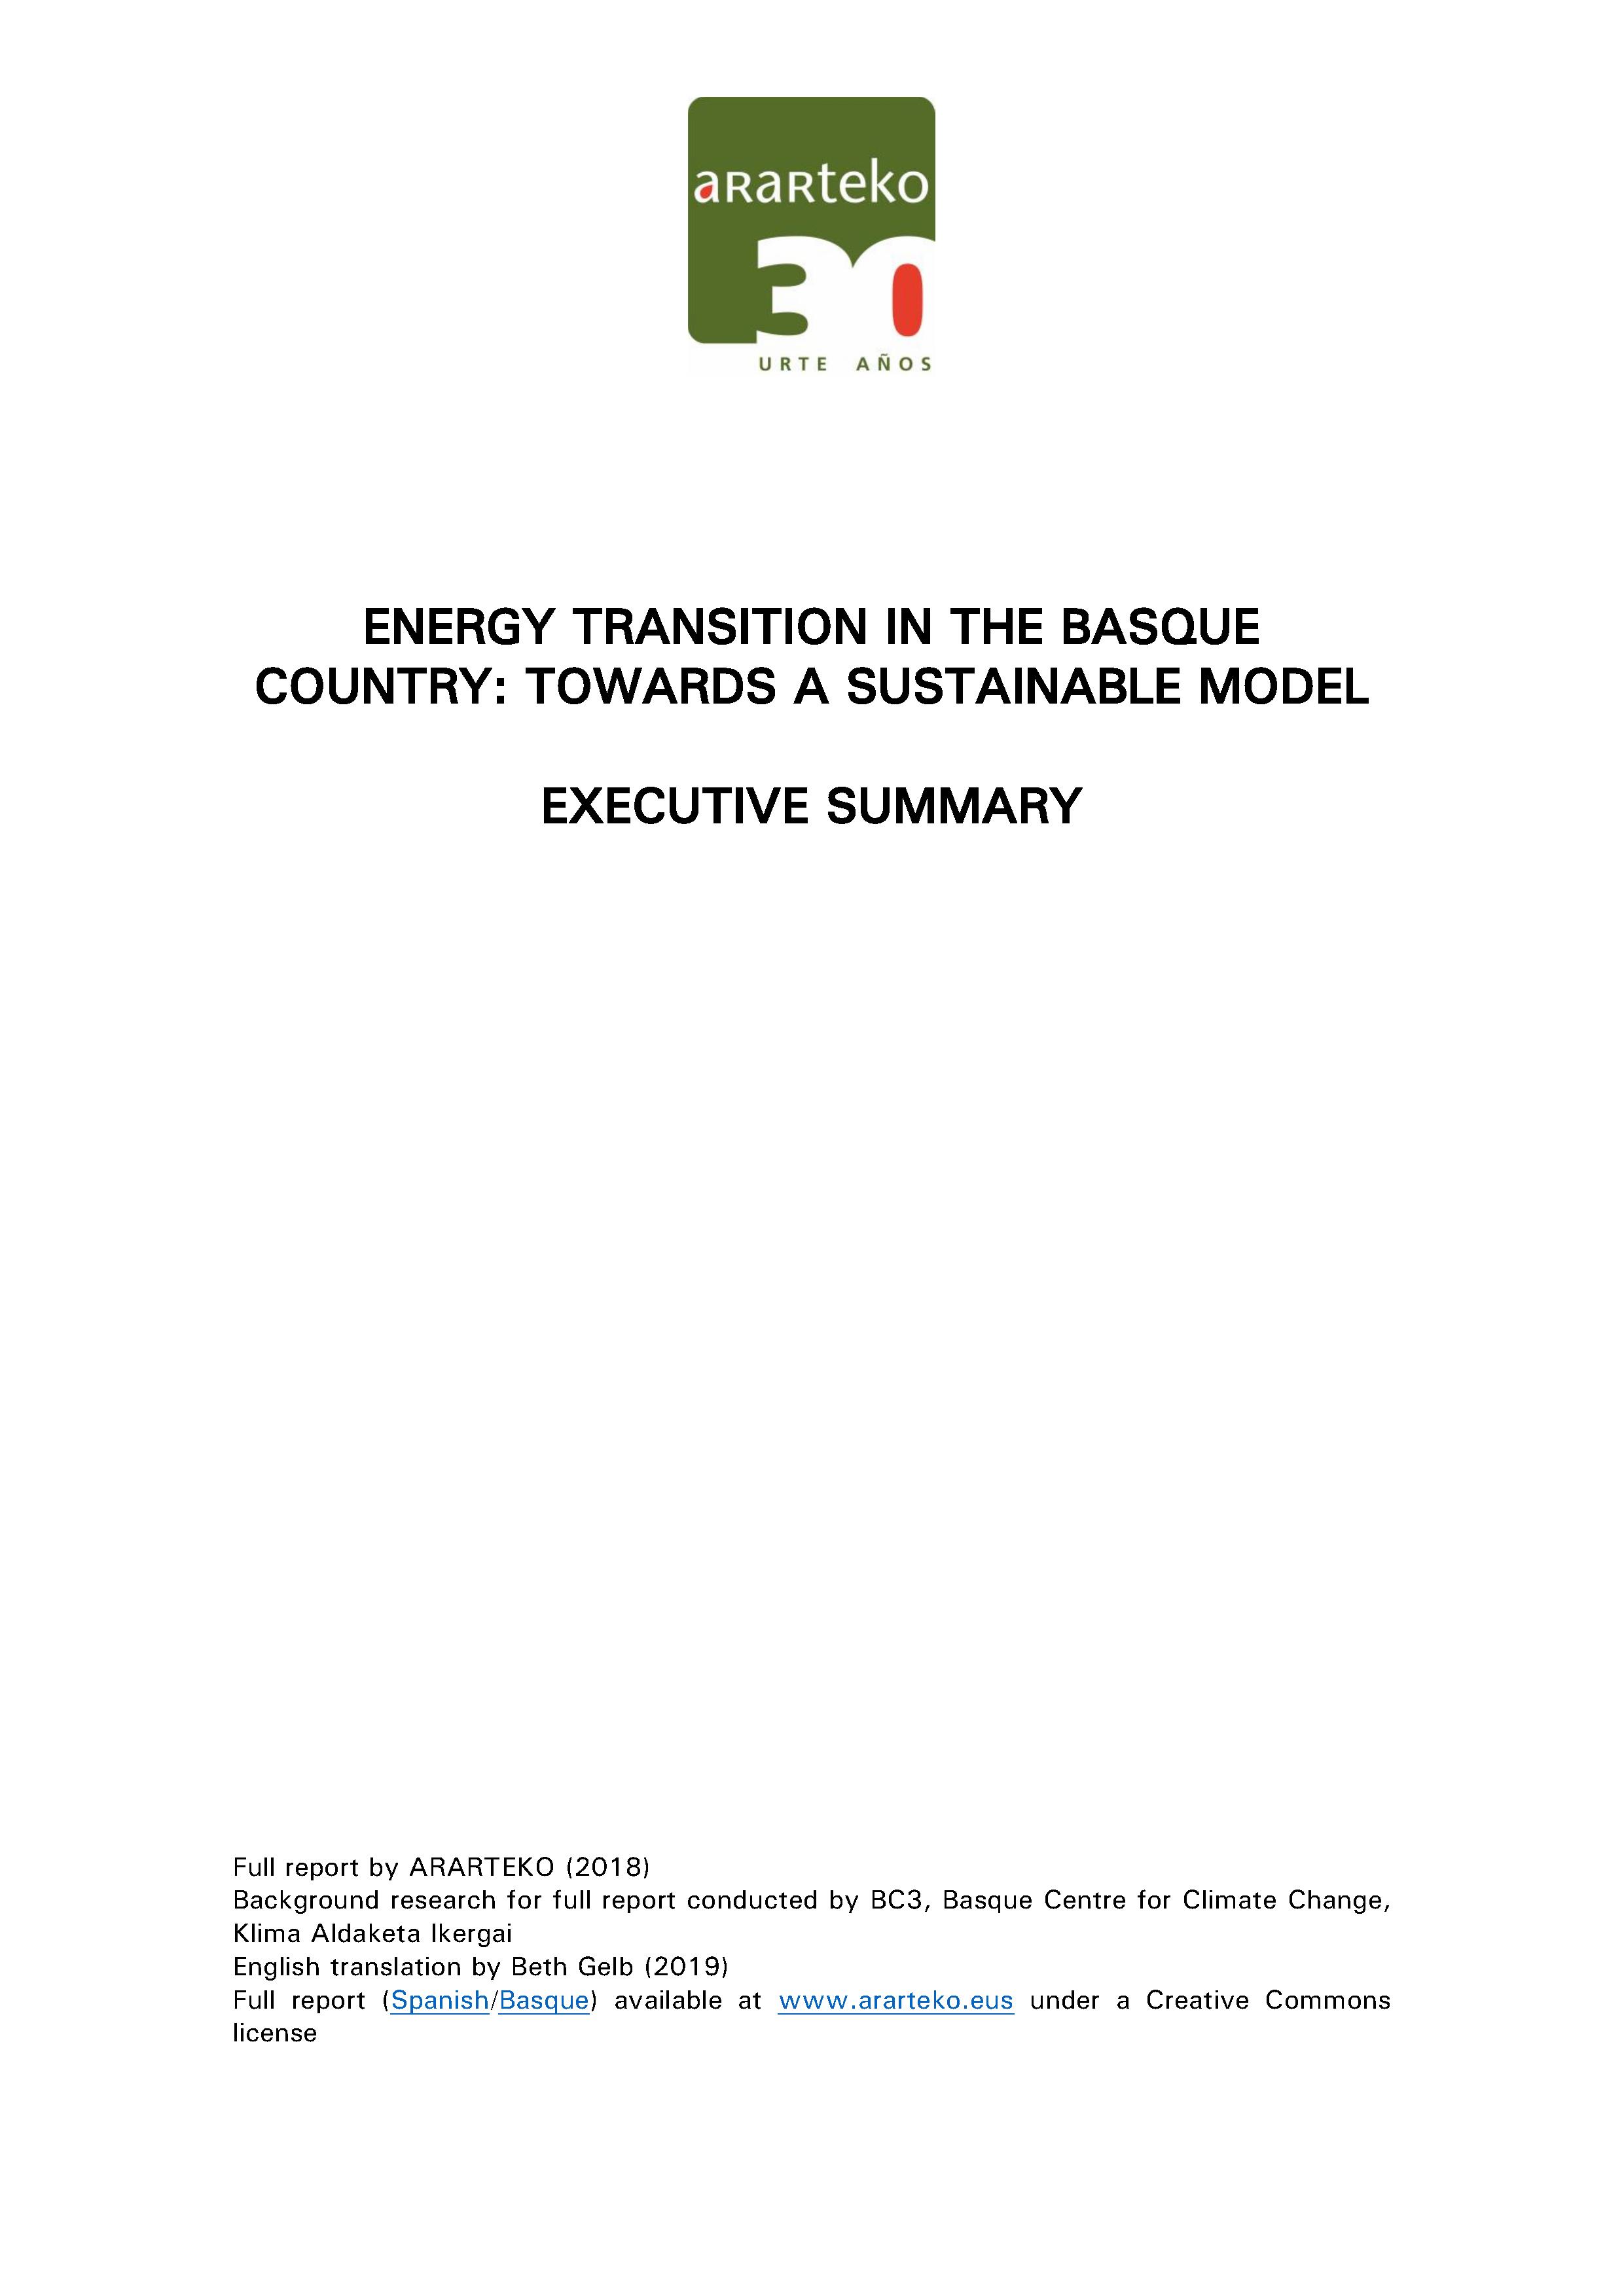 Energy transition in the Basque Country: towards a sustainable model